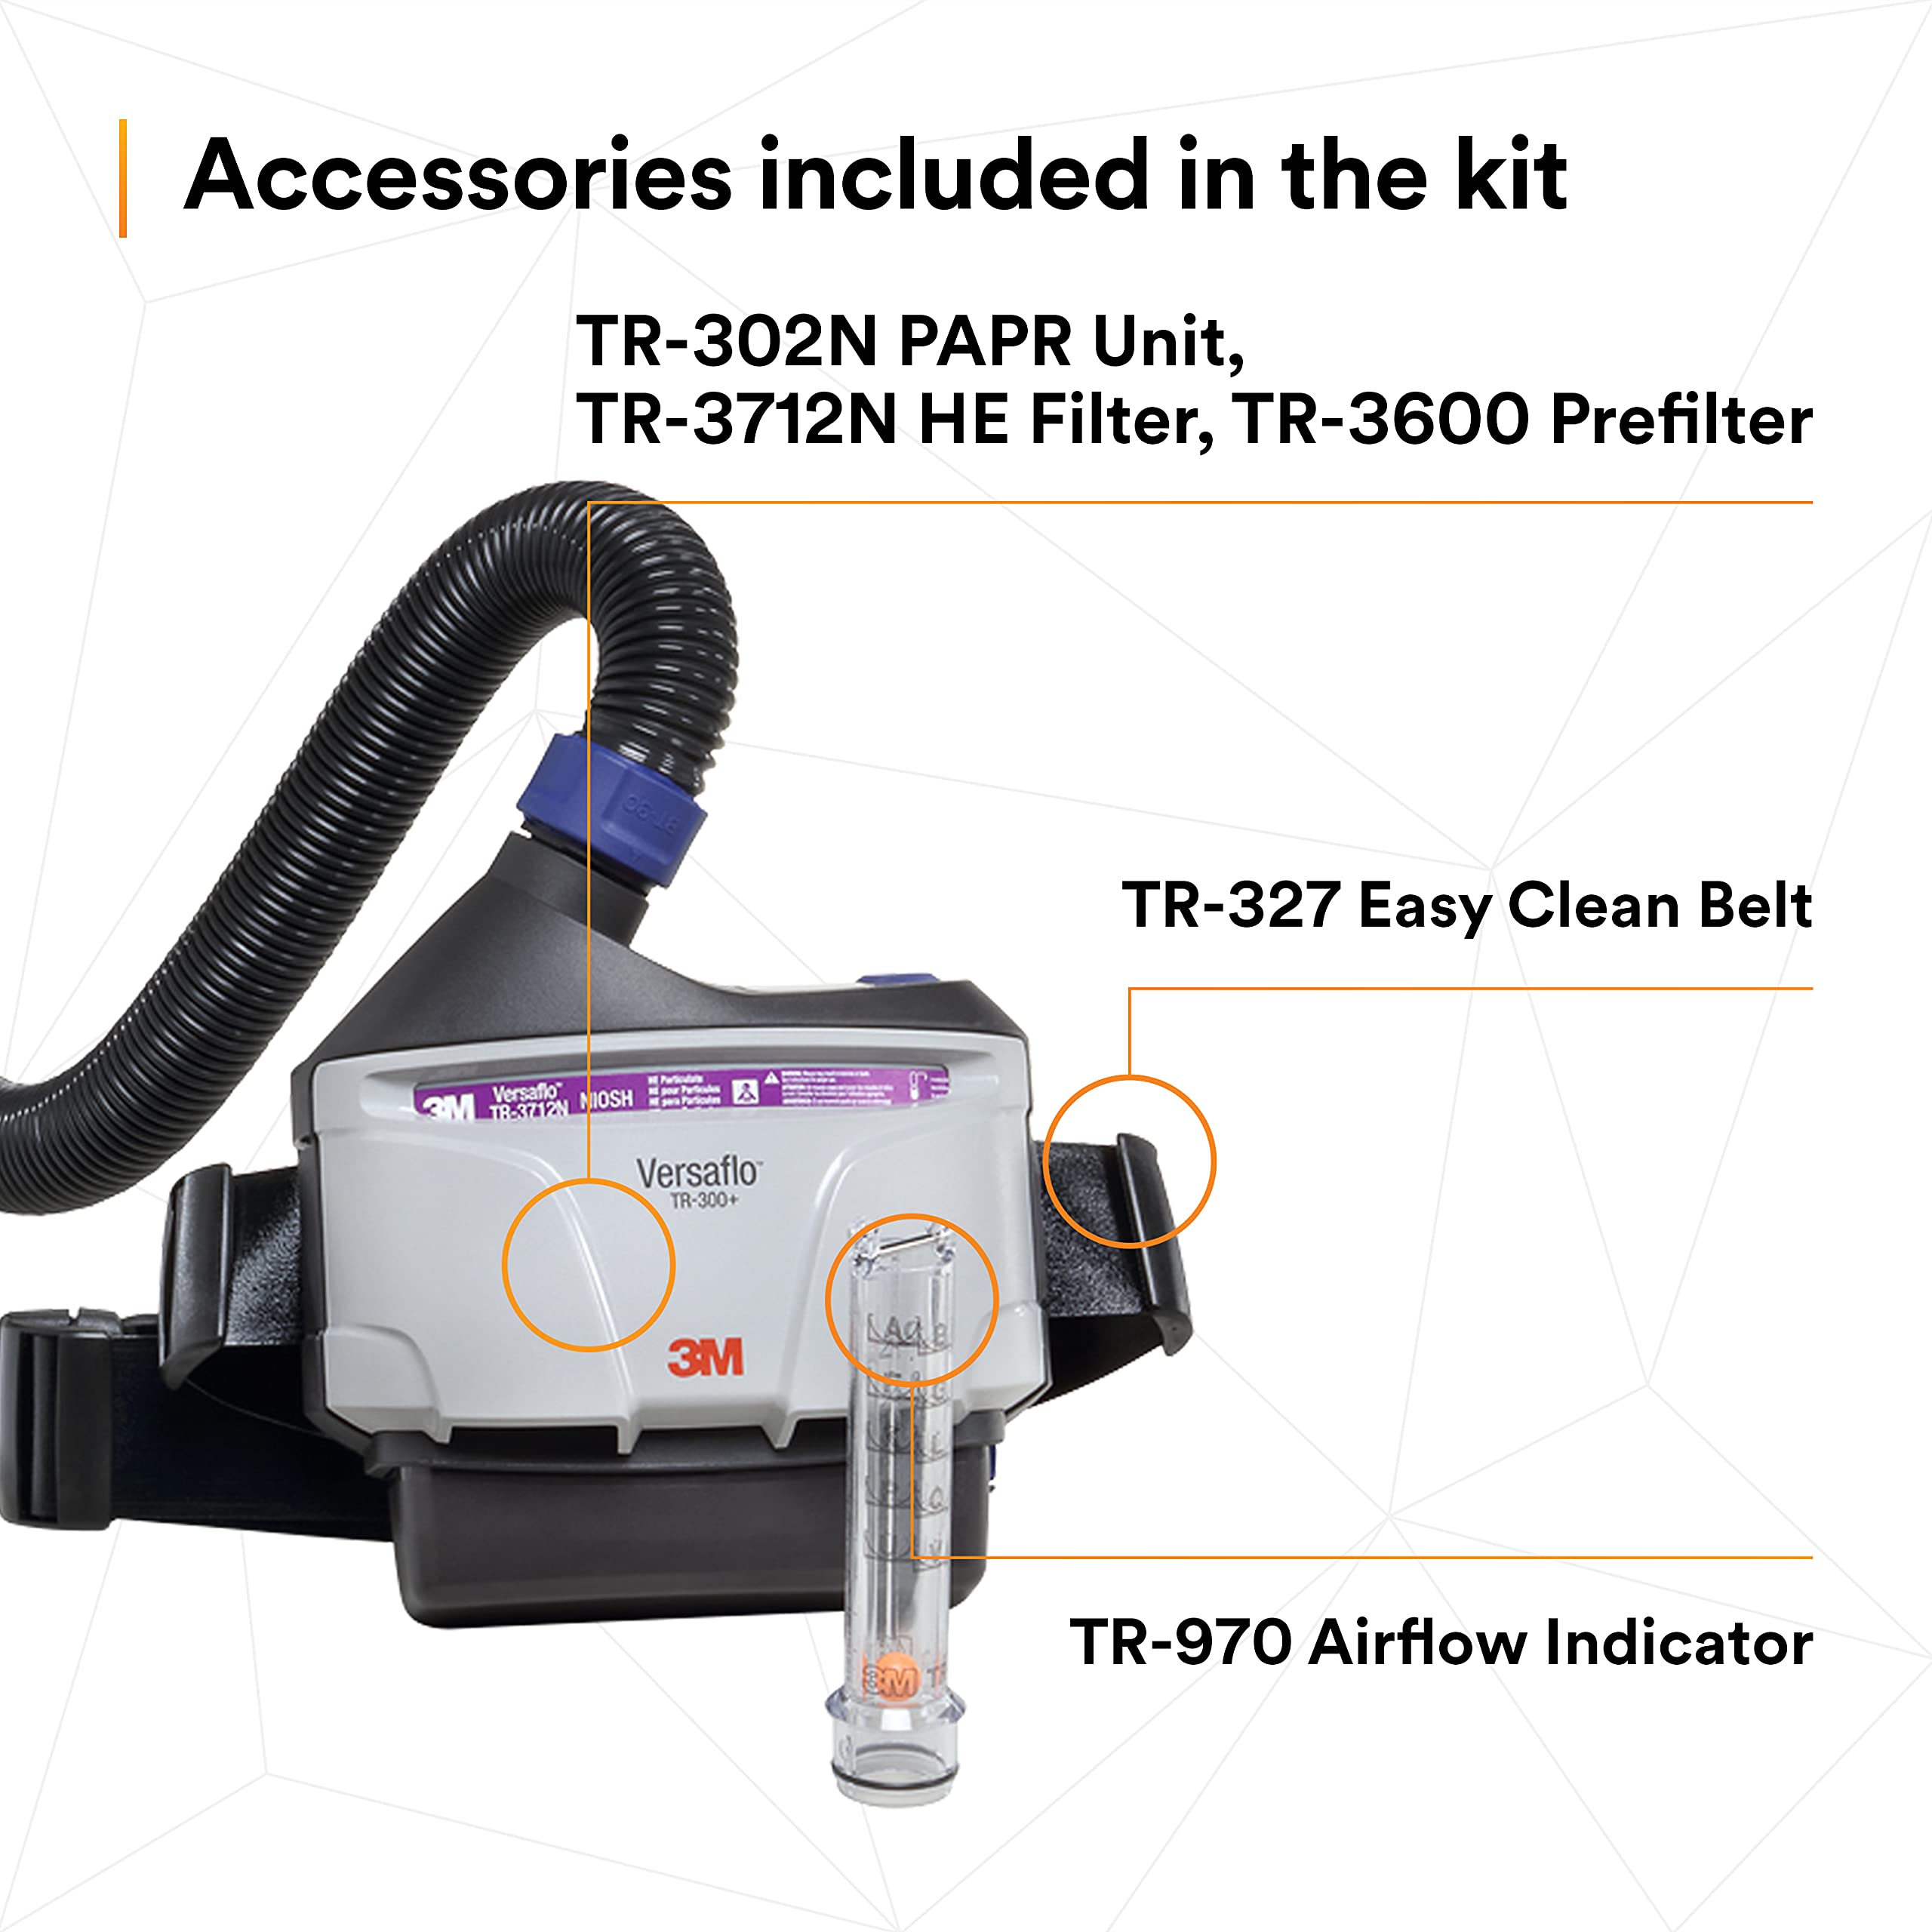 3M PAPR Respirator, Versaflo Powered Air Purifying Respirator Kit, TR-300N+ ECK, Healthcare, Hood Assembly, Easy to Clean and Maintain, All-in-One Respiratory Protection for Particulates